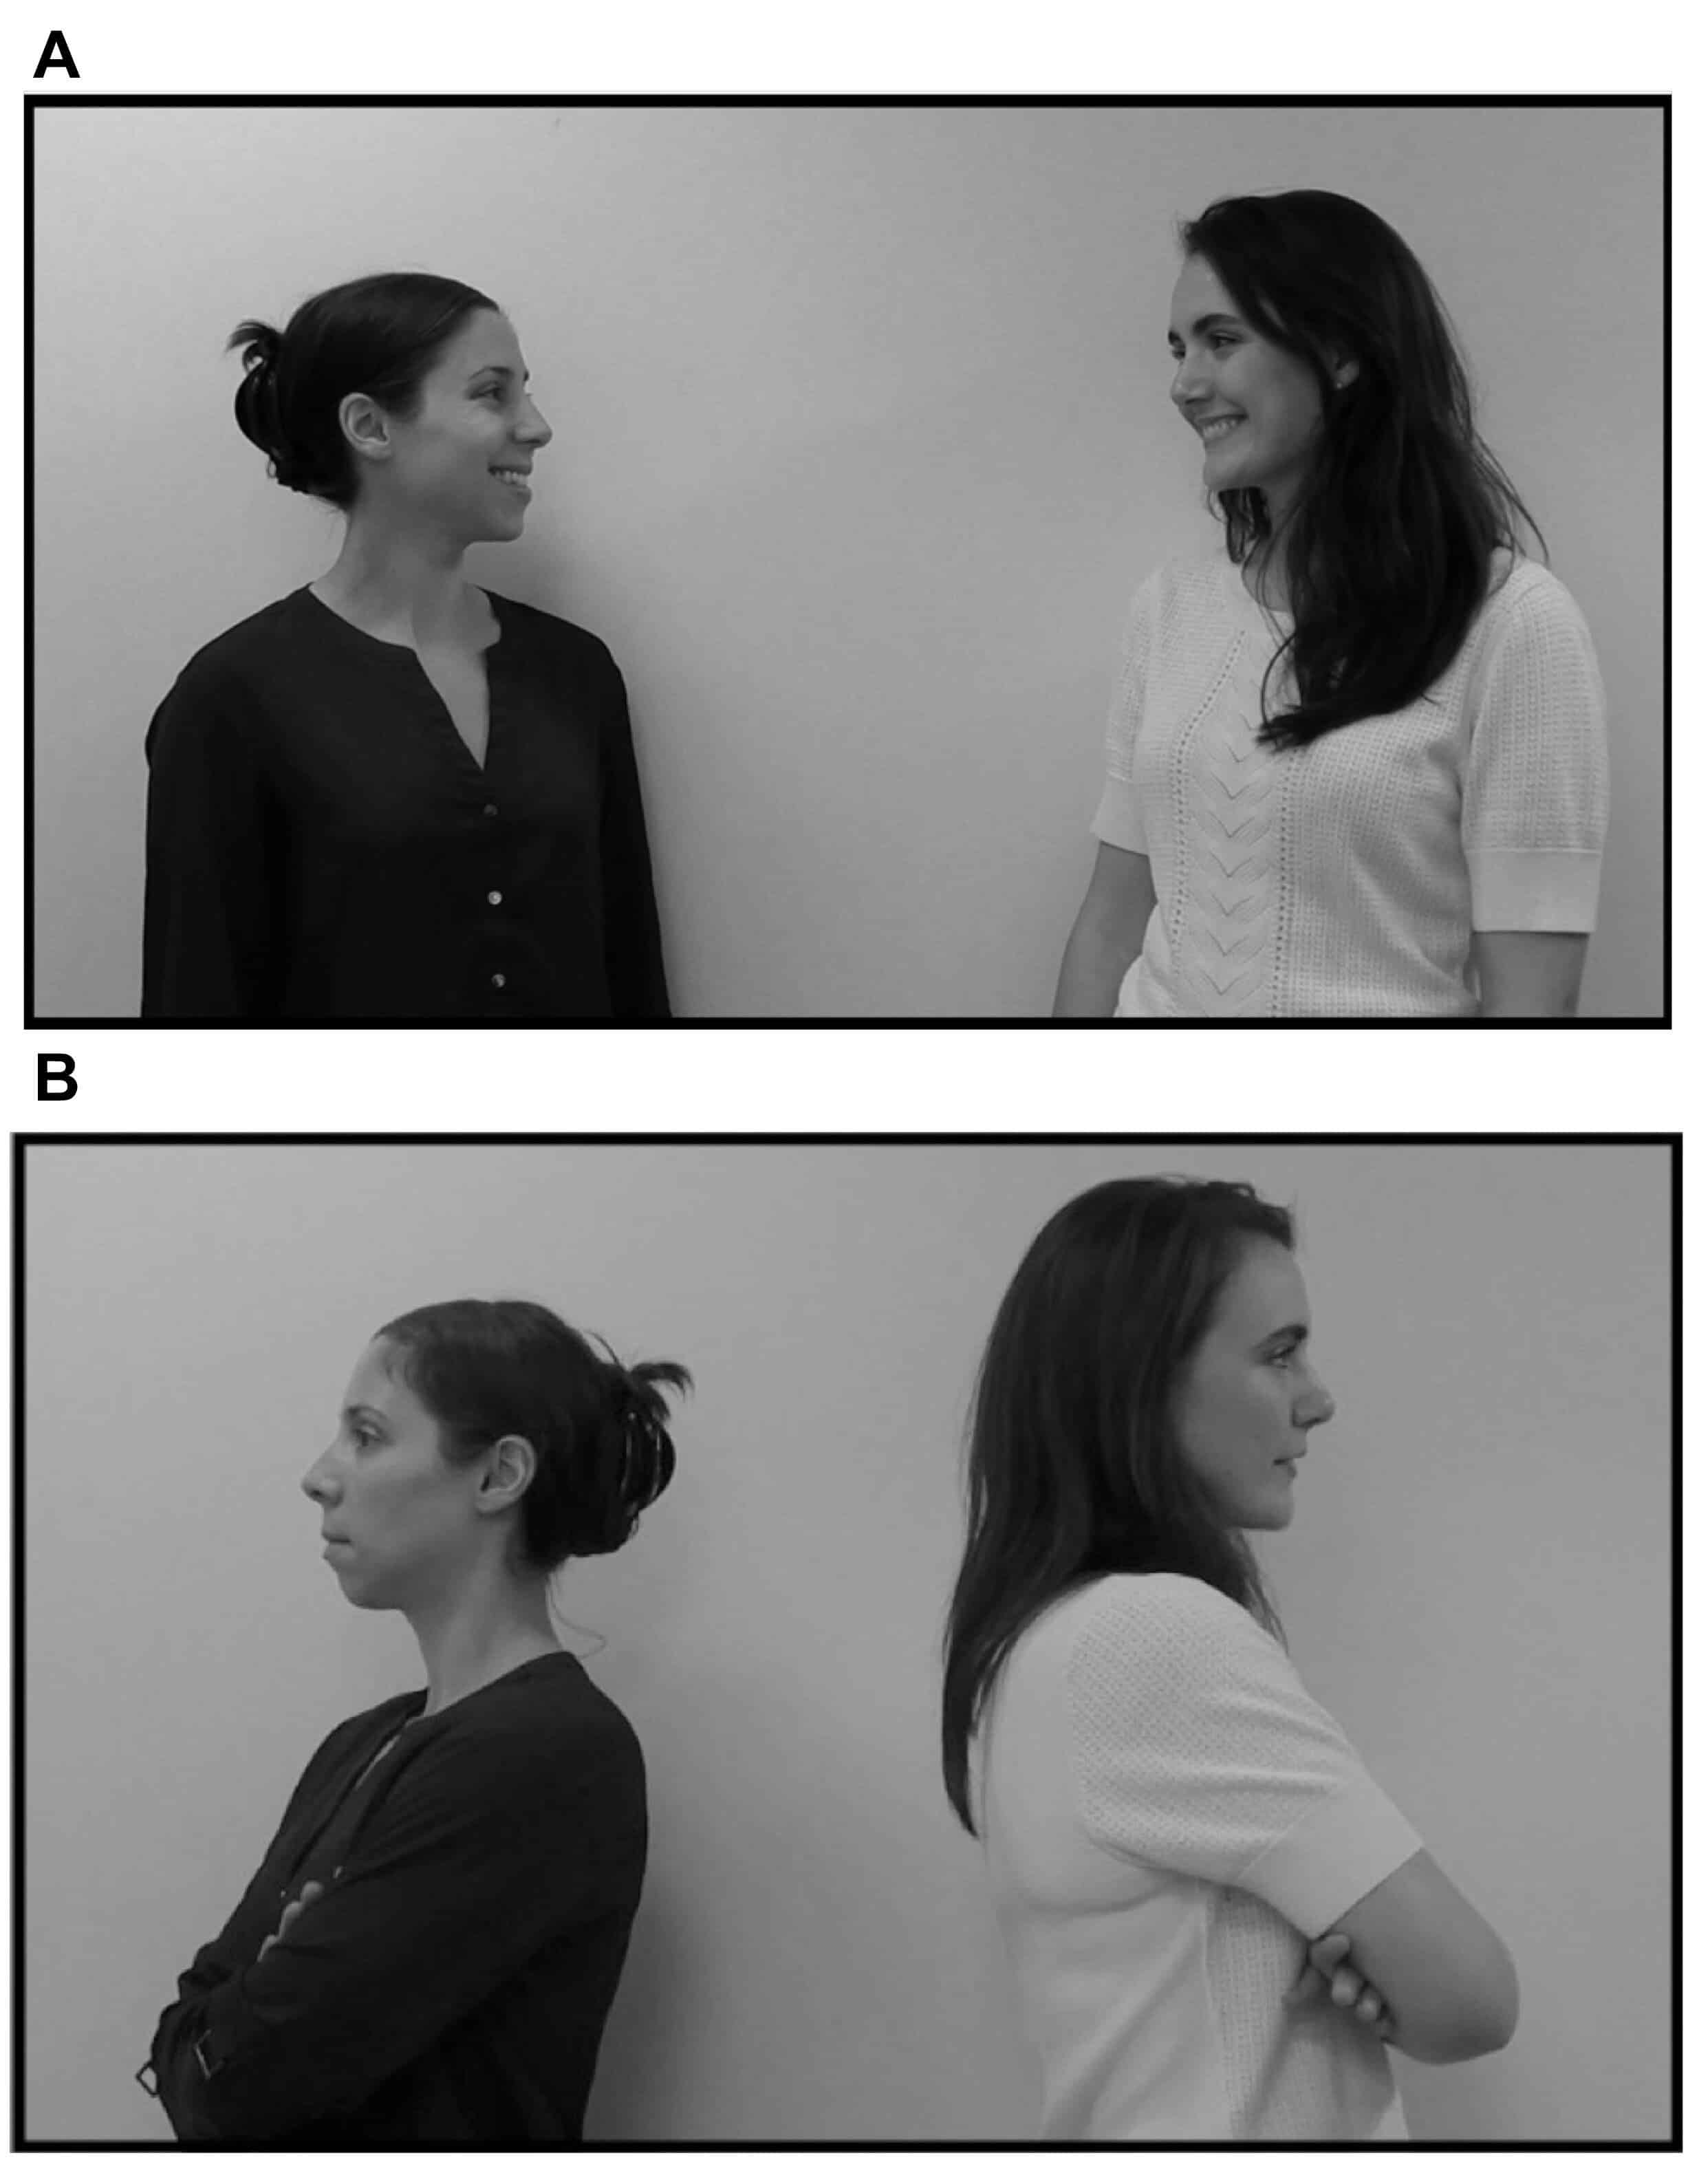 Infants saw two types of video clips of actors interacting: in one, two women faced and smiled at each other, as if they were friends (A); in another, the two women turned their backs to each other, indicating that they were strangers (B). Credit: Athena Vouloumanos, NYU's Department of Psychology.